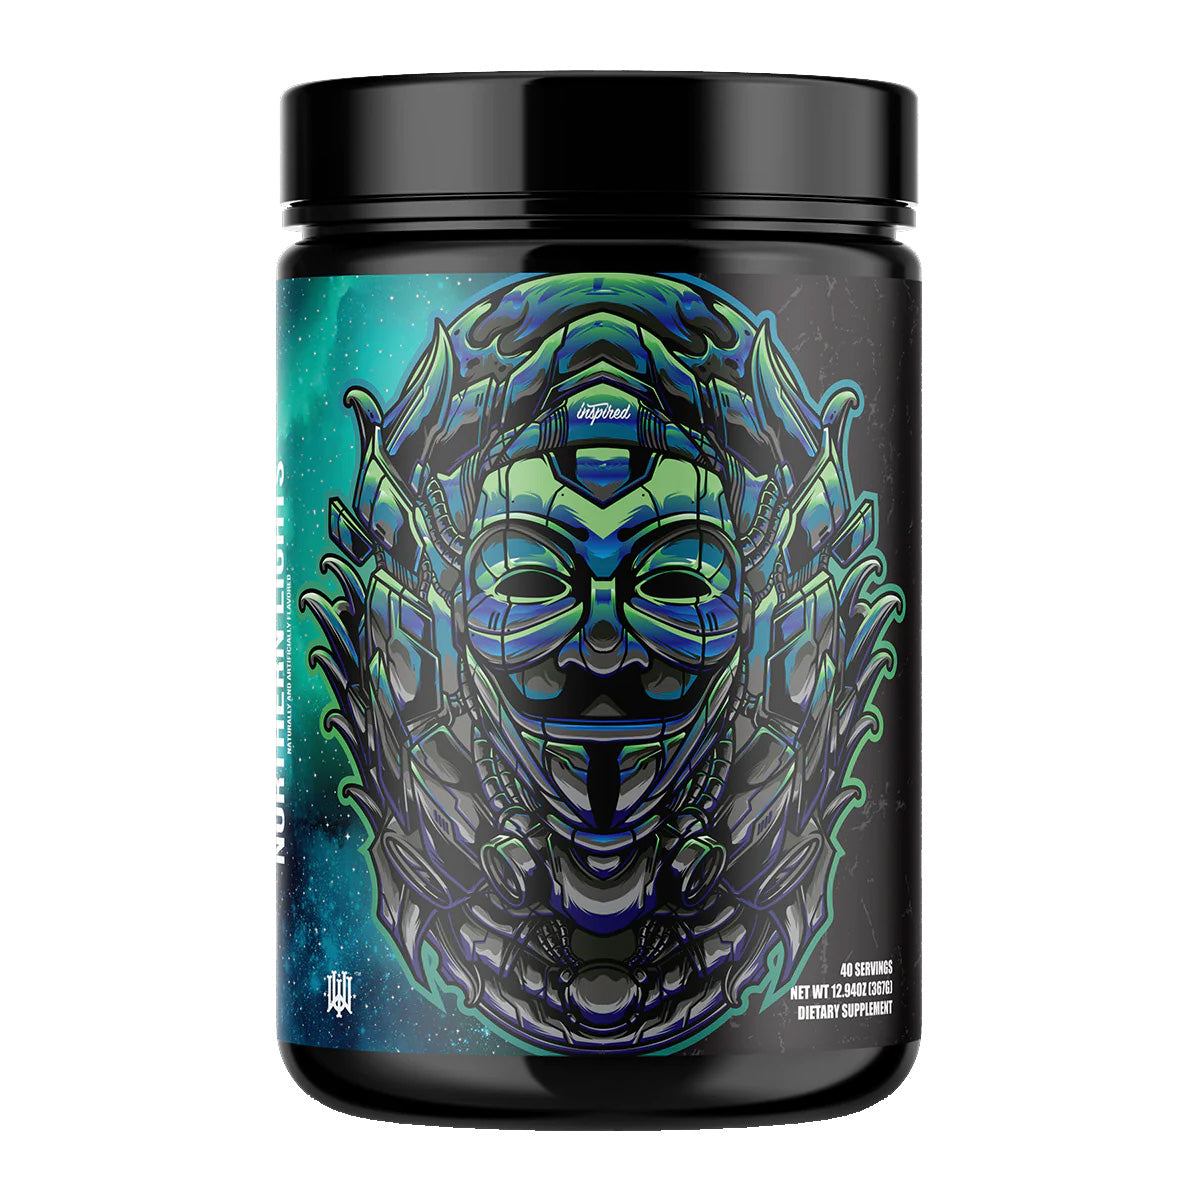 DVST8 Of The Union Pre-Workout Northern Lights